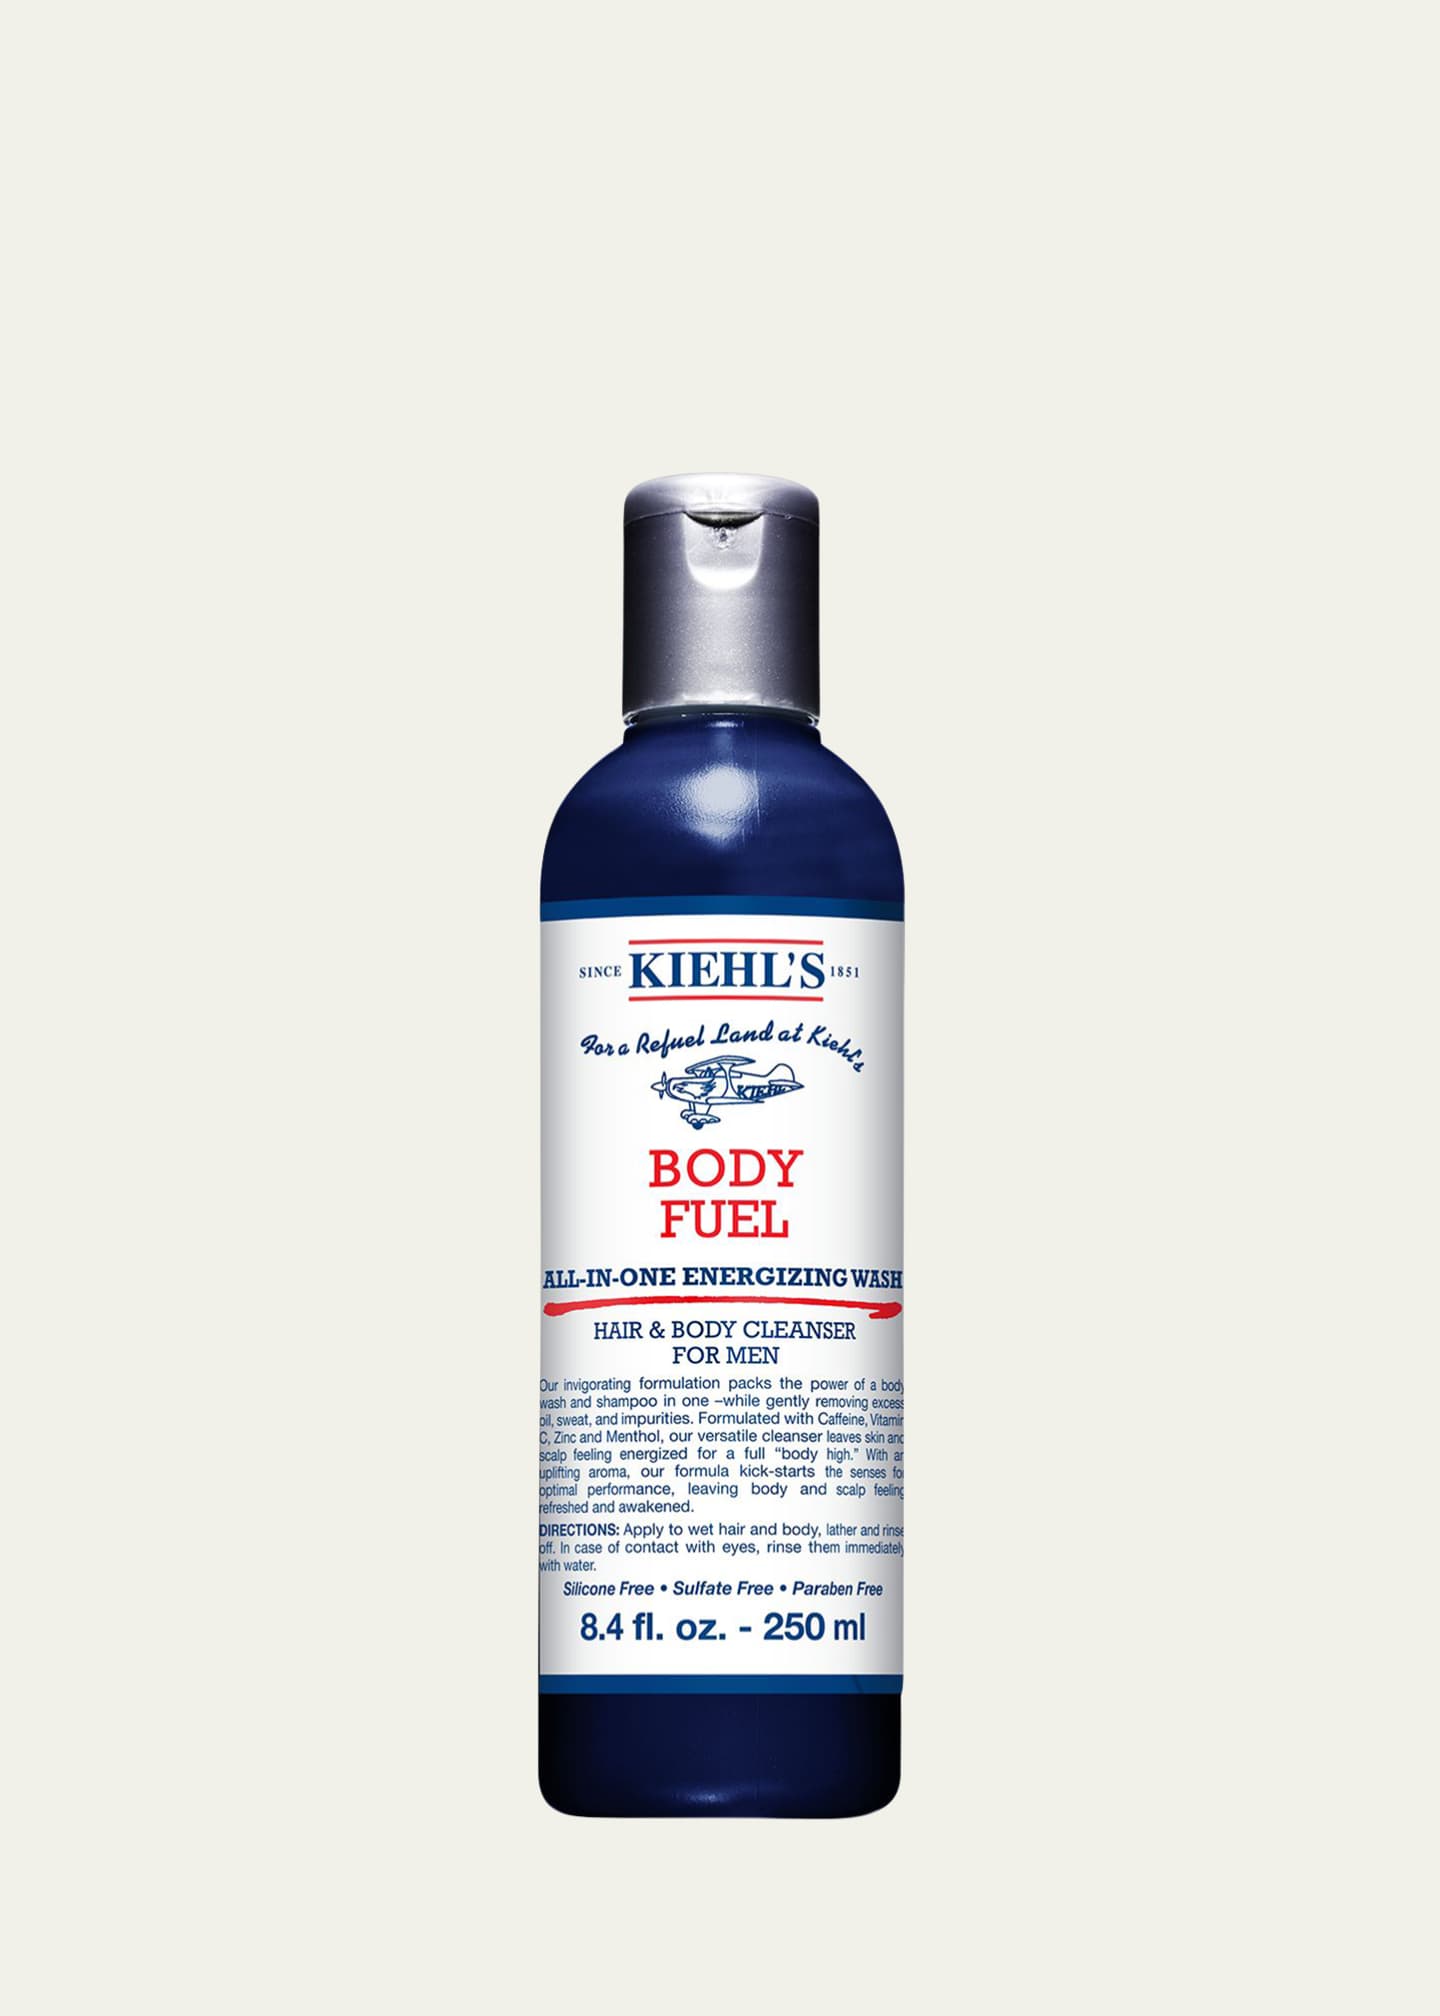 Kiehl's Since 1851 Body Fuel All-In-One Energizing Wash for Hair and Body, 8.4 oz.